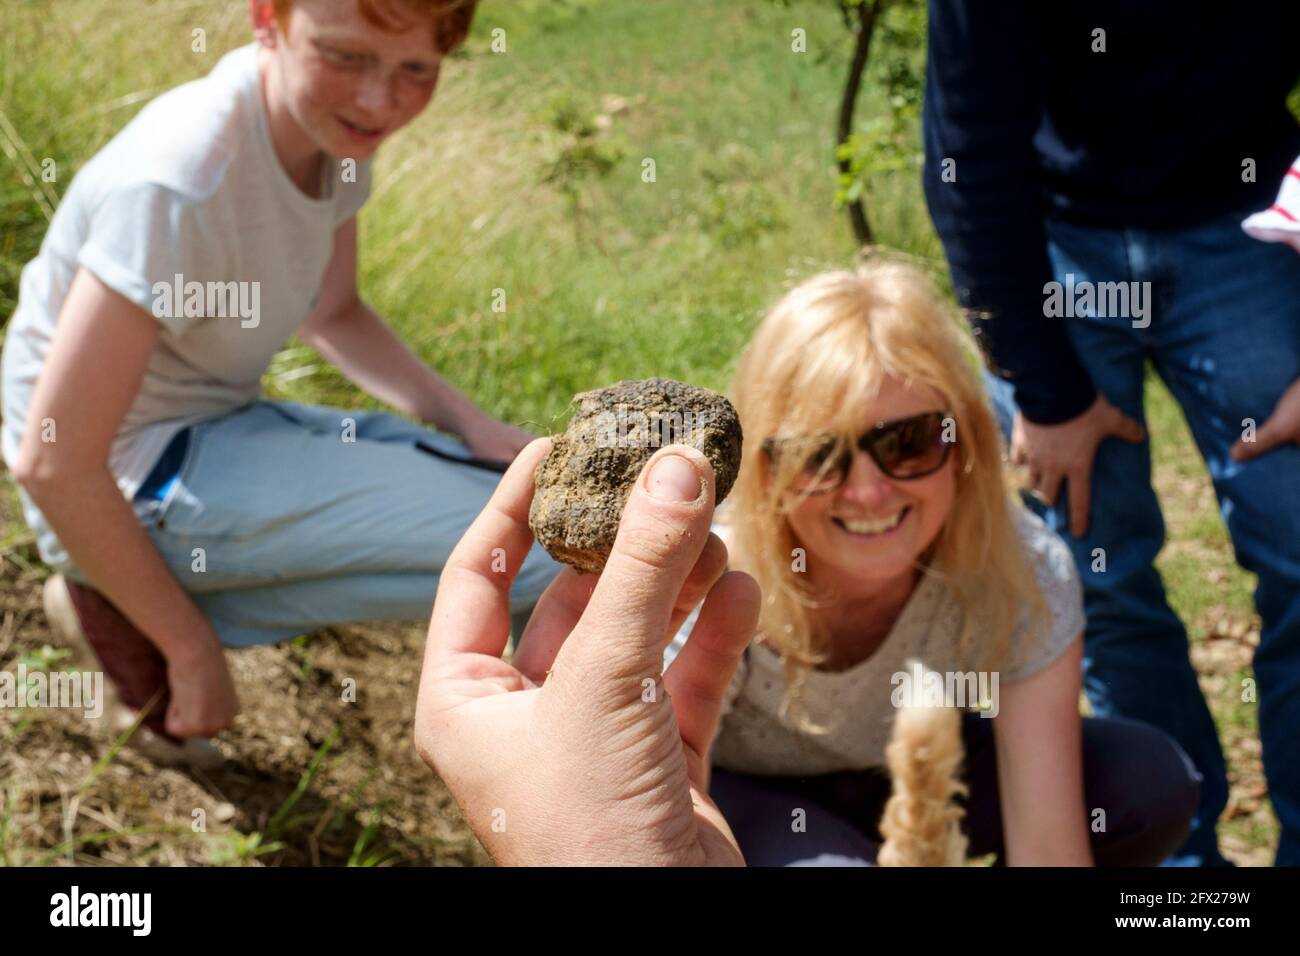 A guide holds a black truffle recently found on a tourist truffle hunt. Stock Photo